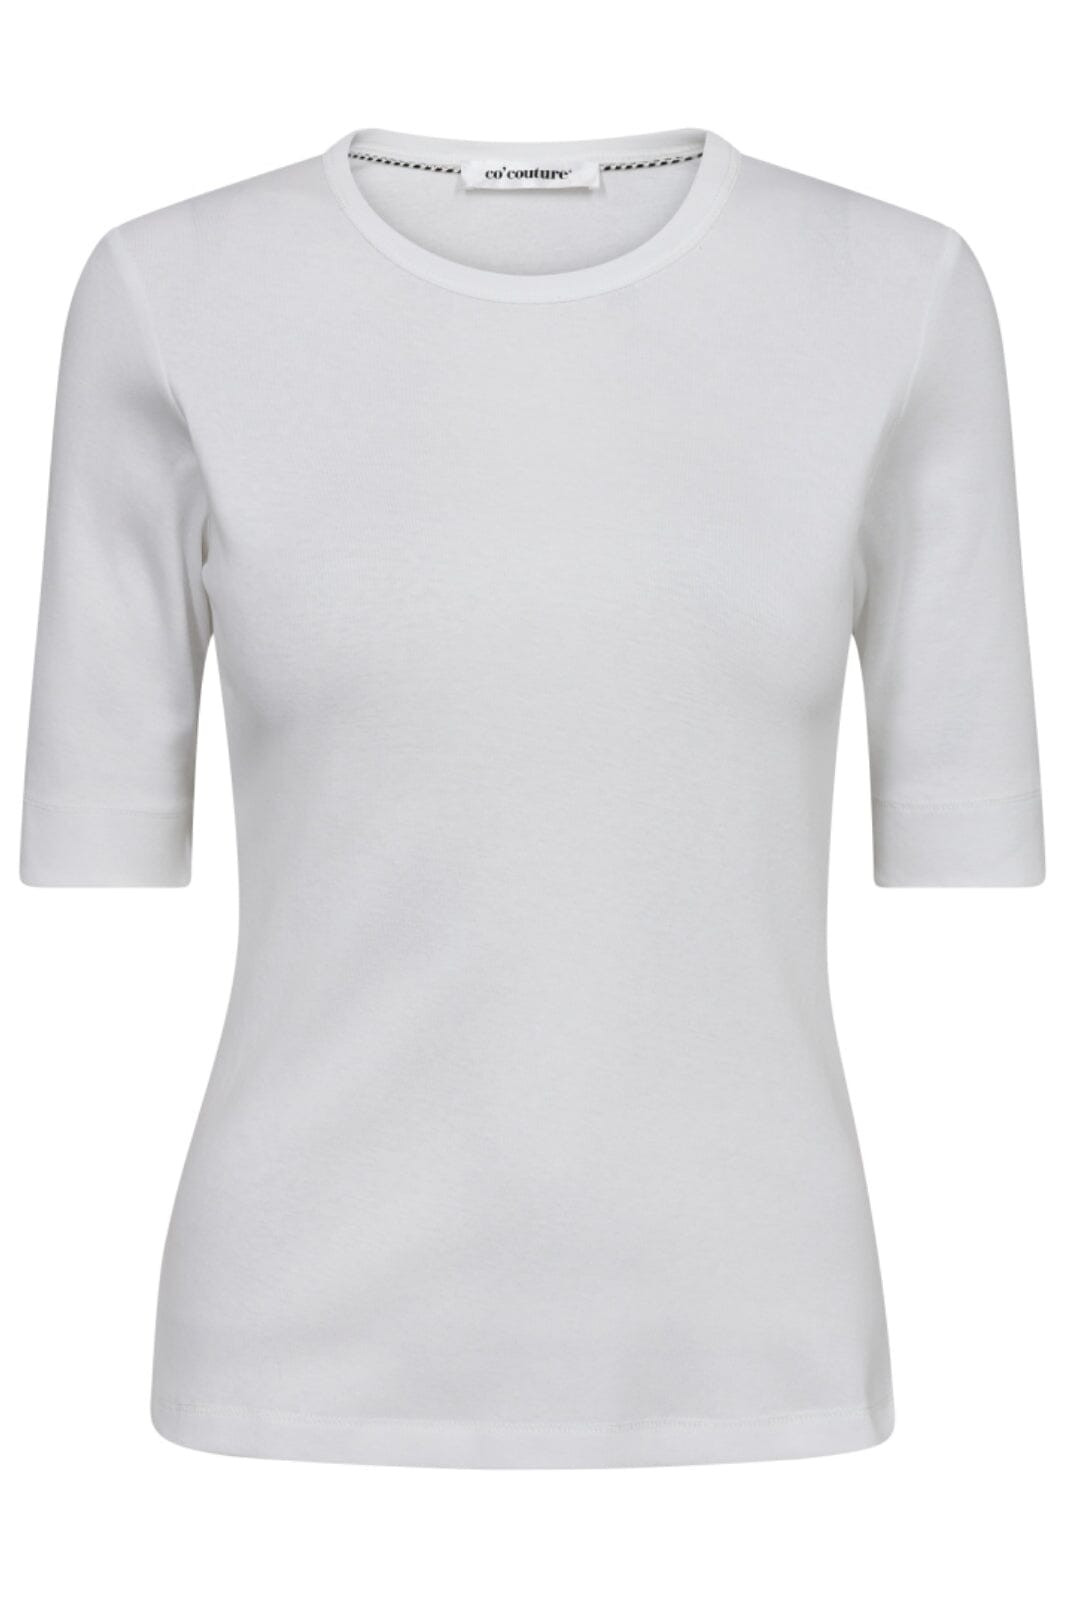 Co´couture - Grannycc Ss Tee 33016 - 4000 White T-shirts 